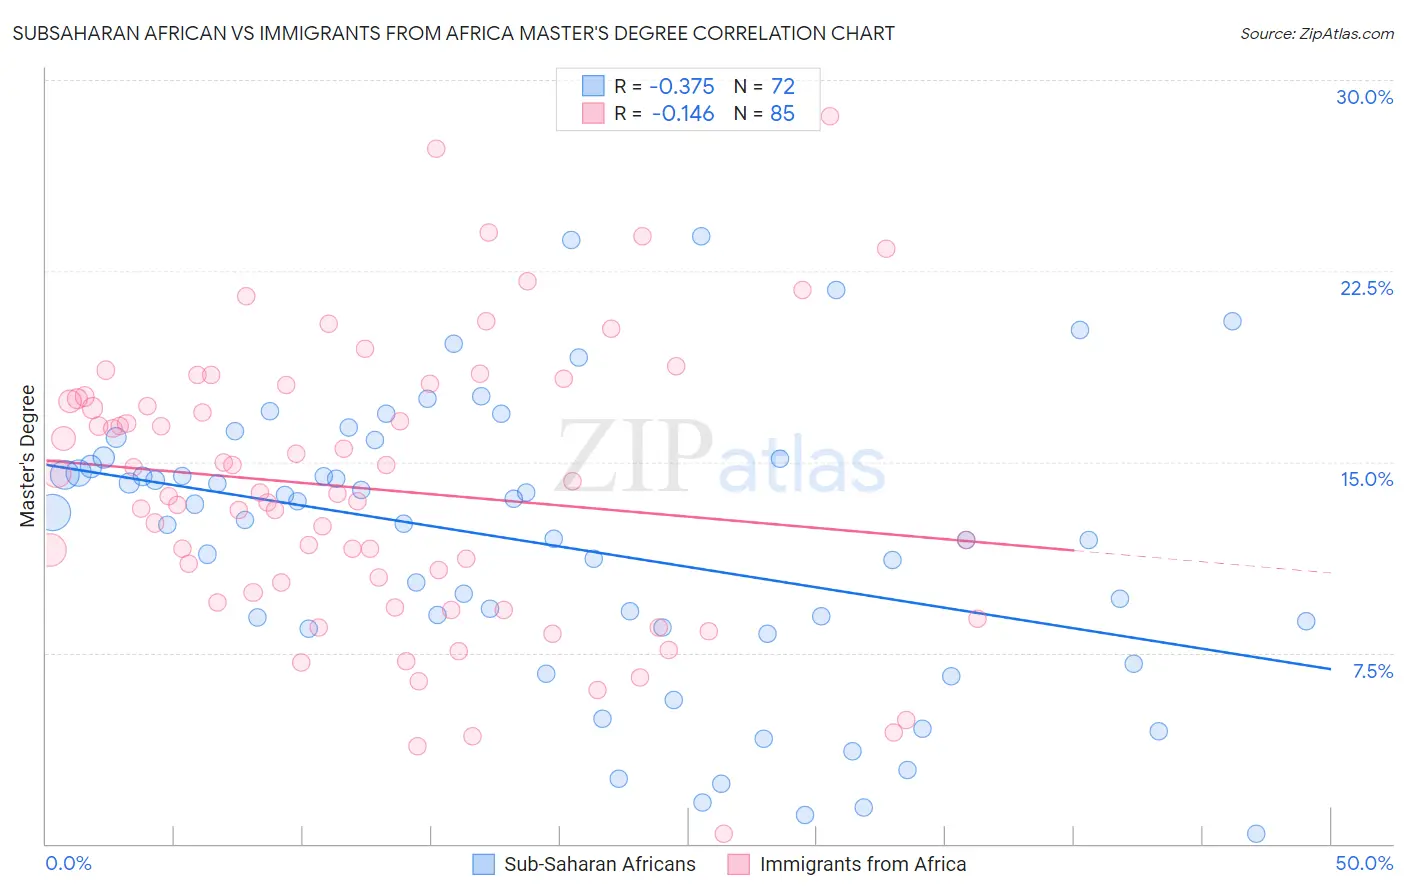 Subsaharan African vs Immigrants from Africa Master's Degree